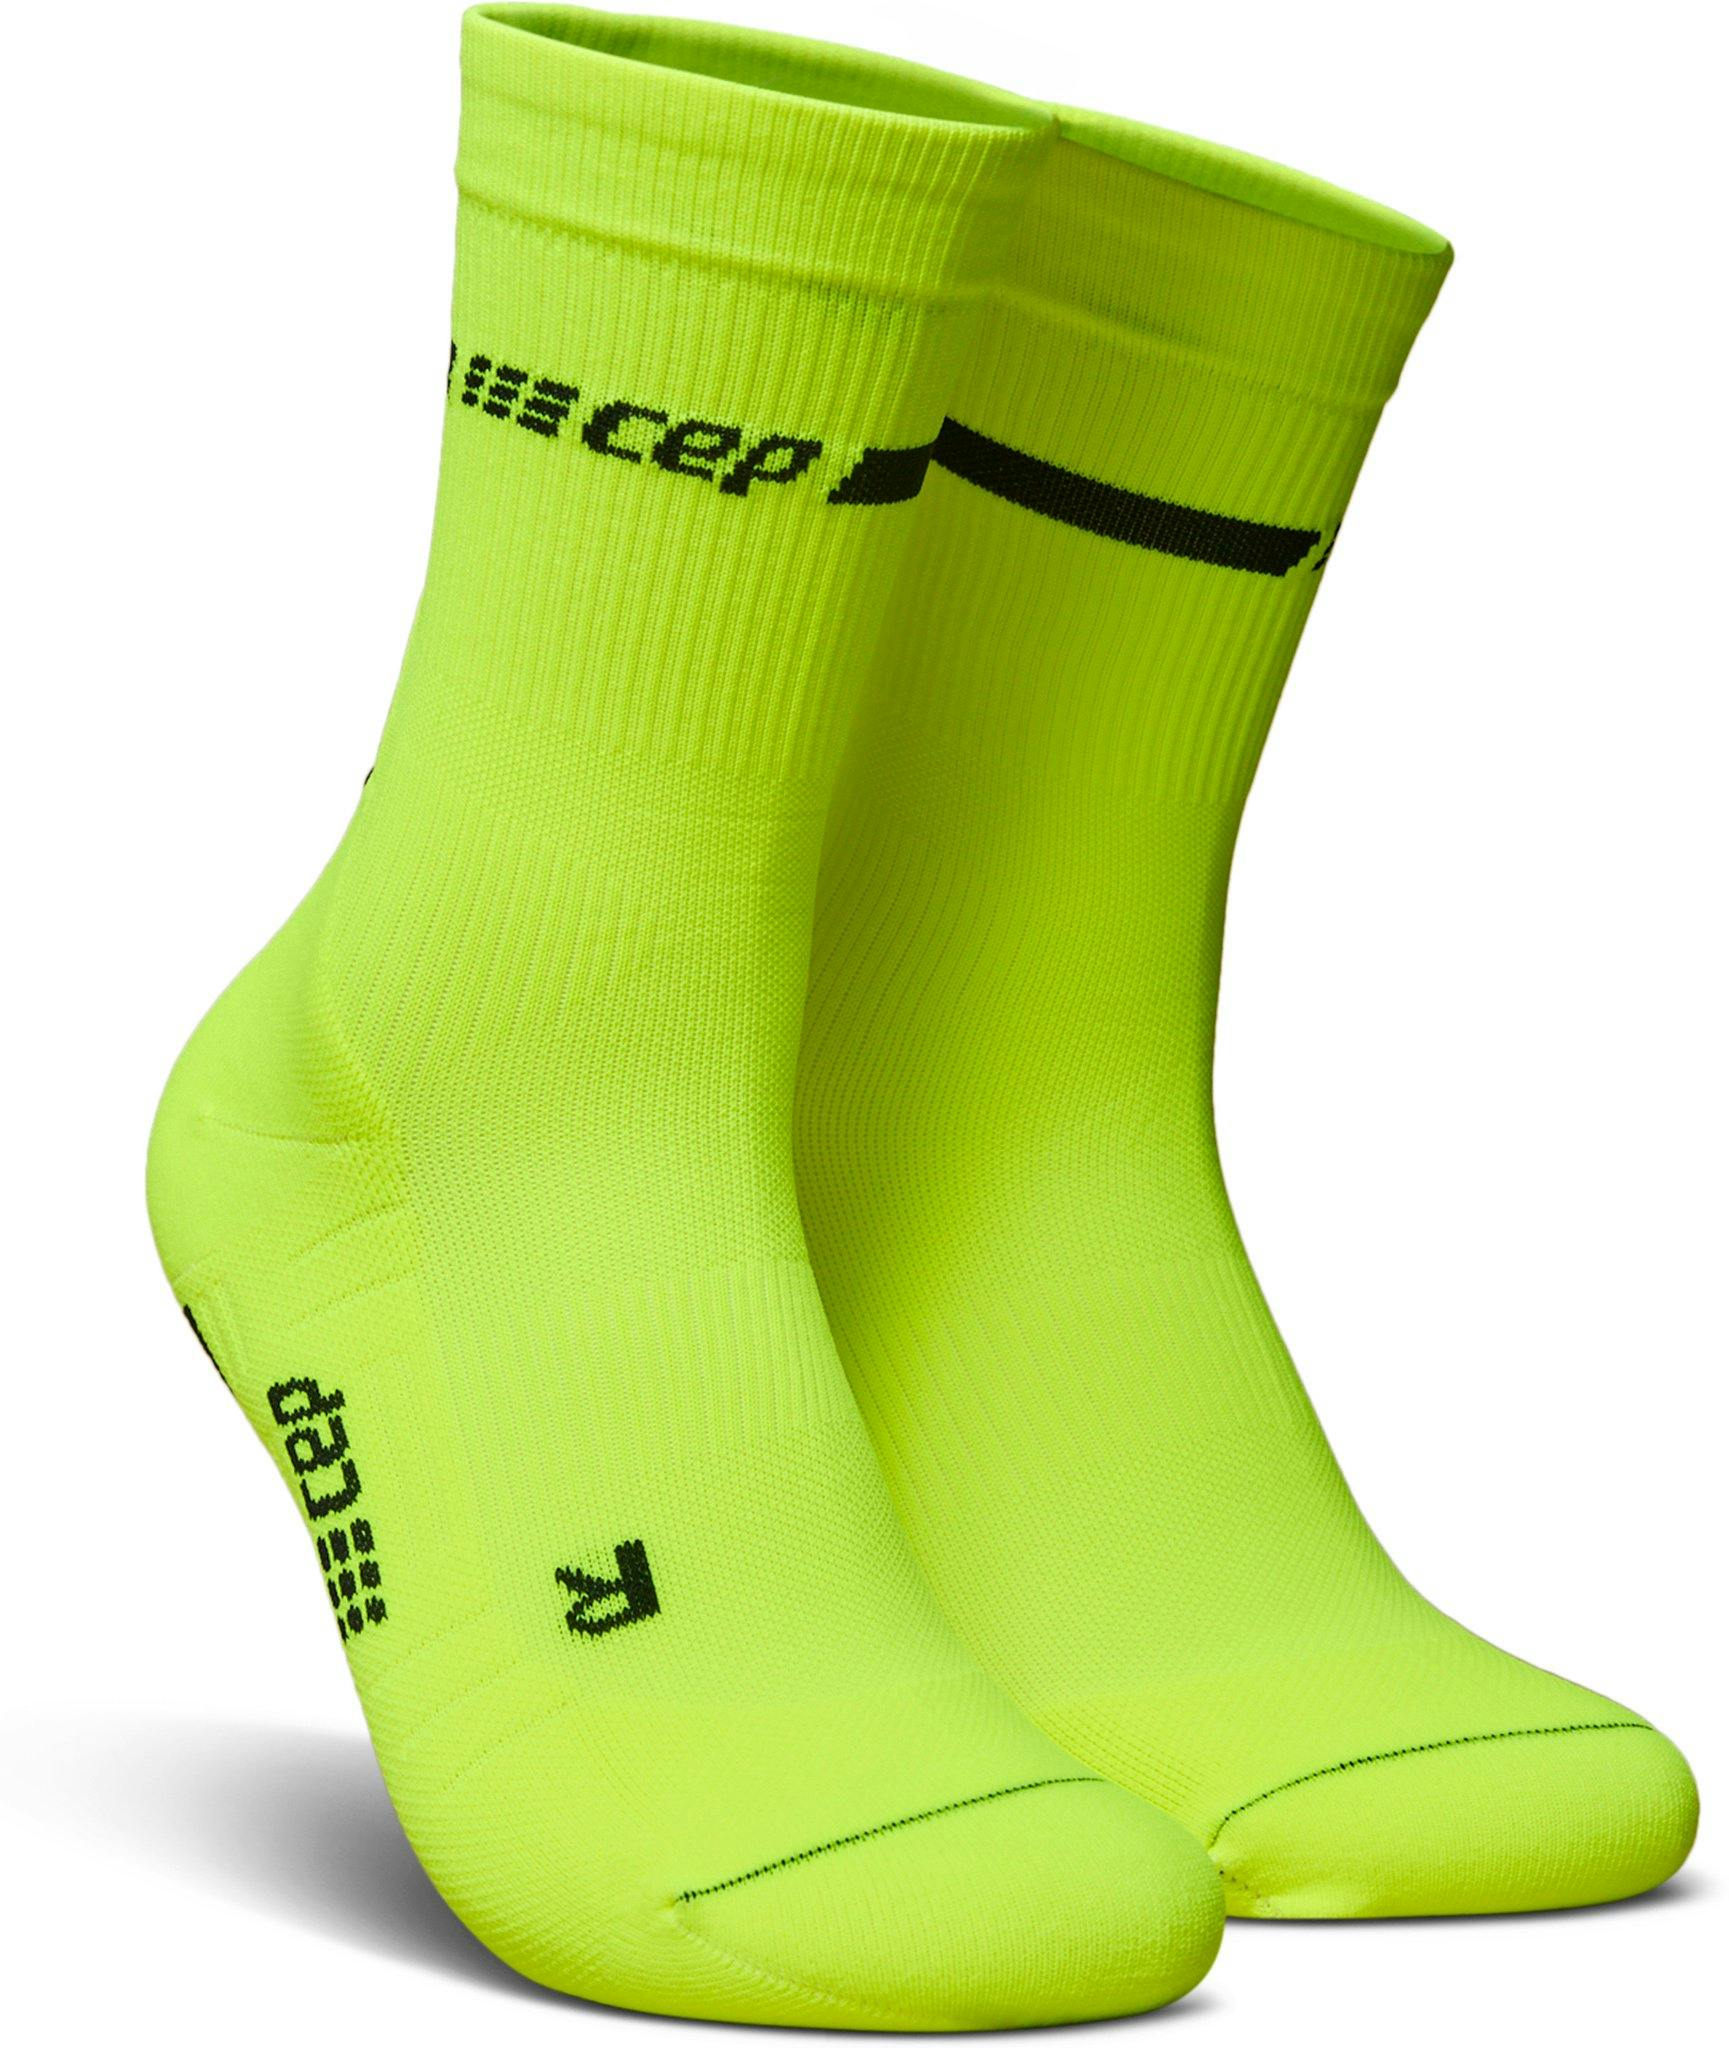 Product image for Neon Mid-Cut Socks - Women's